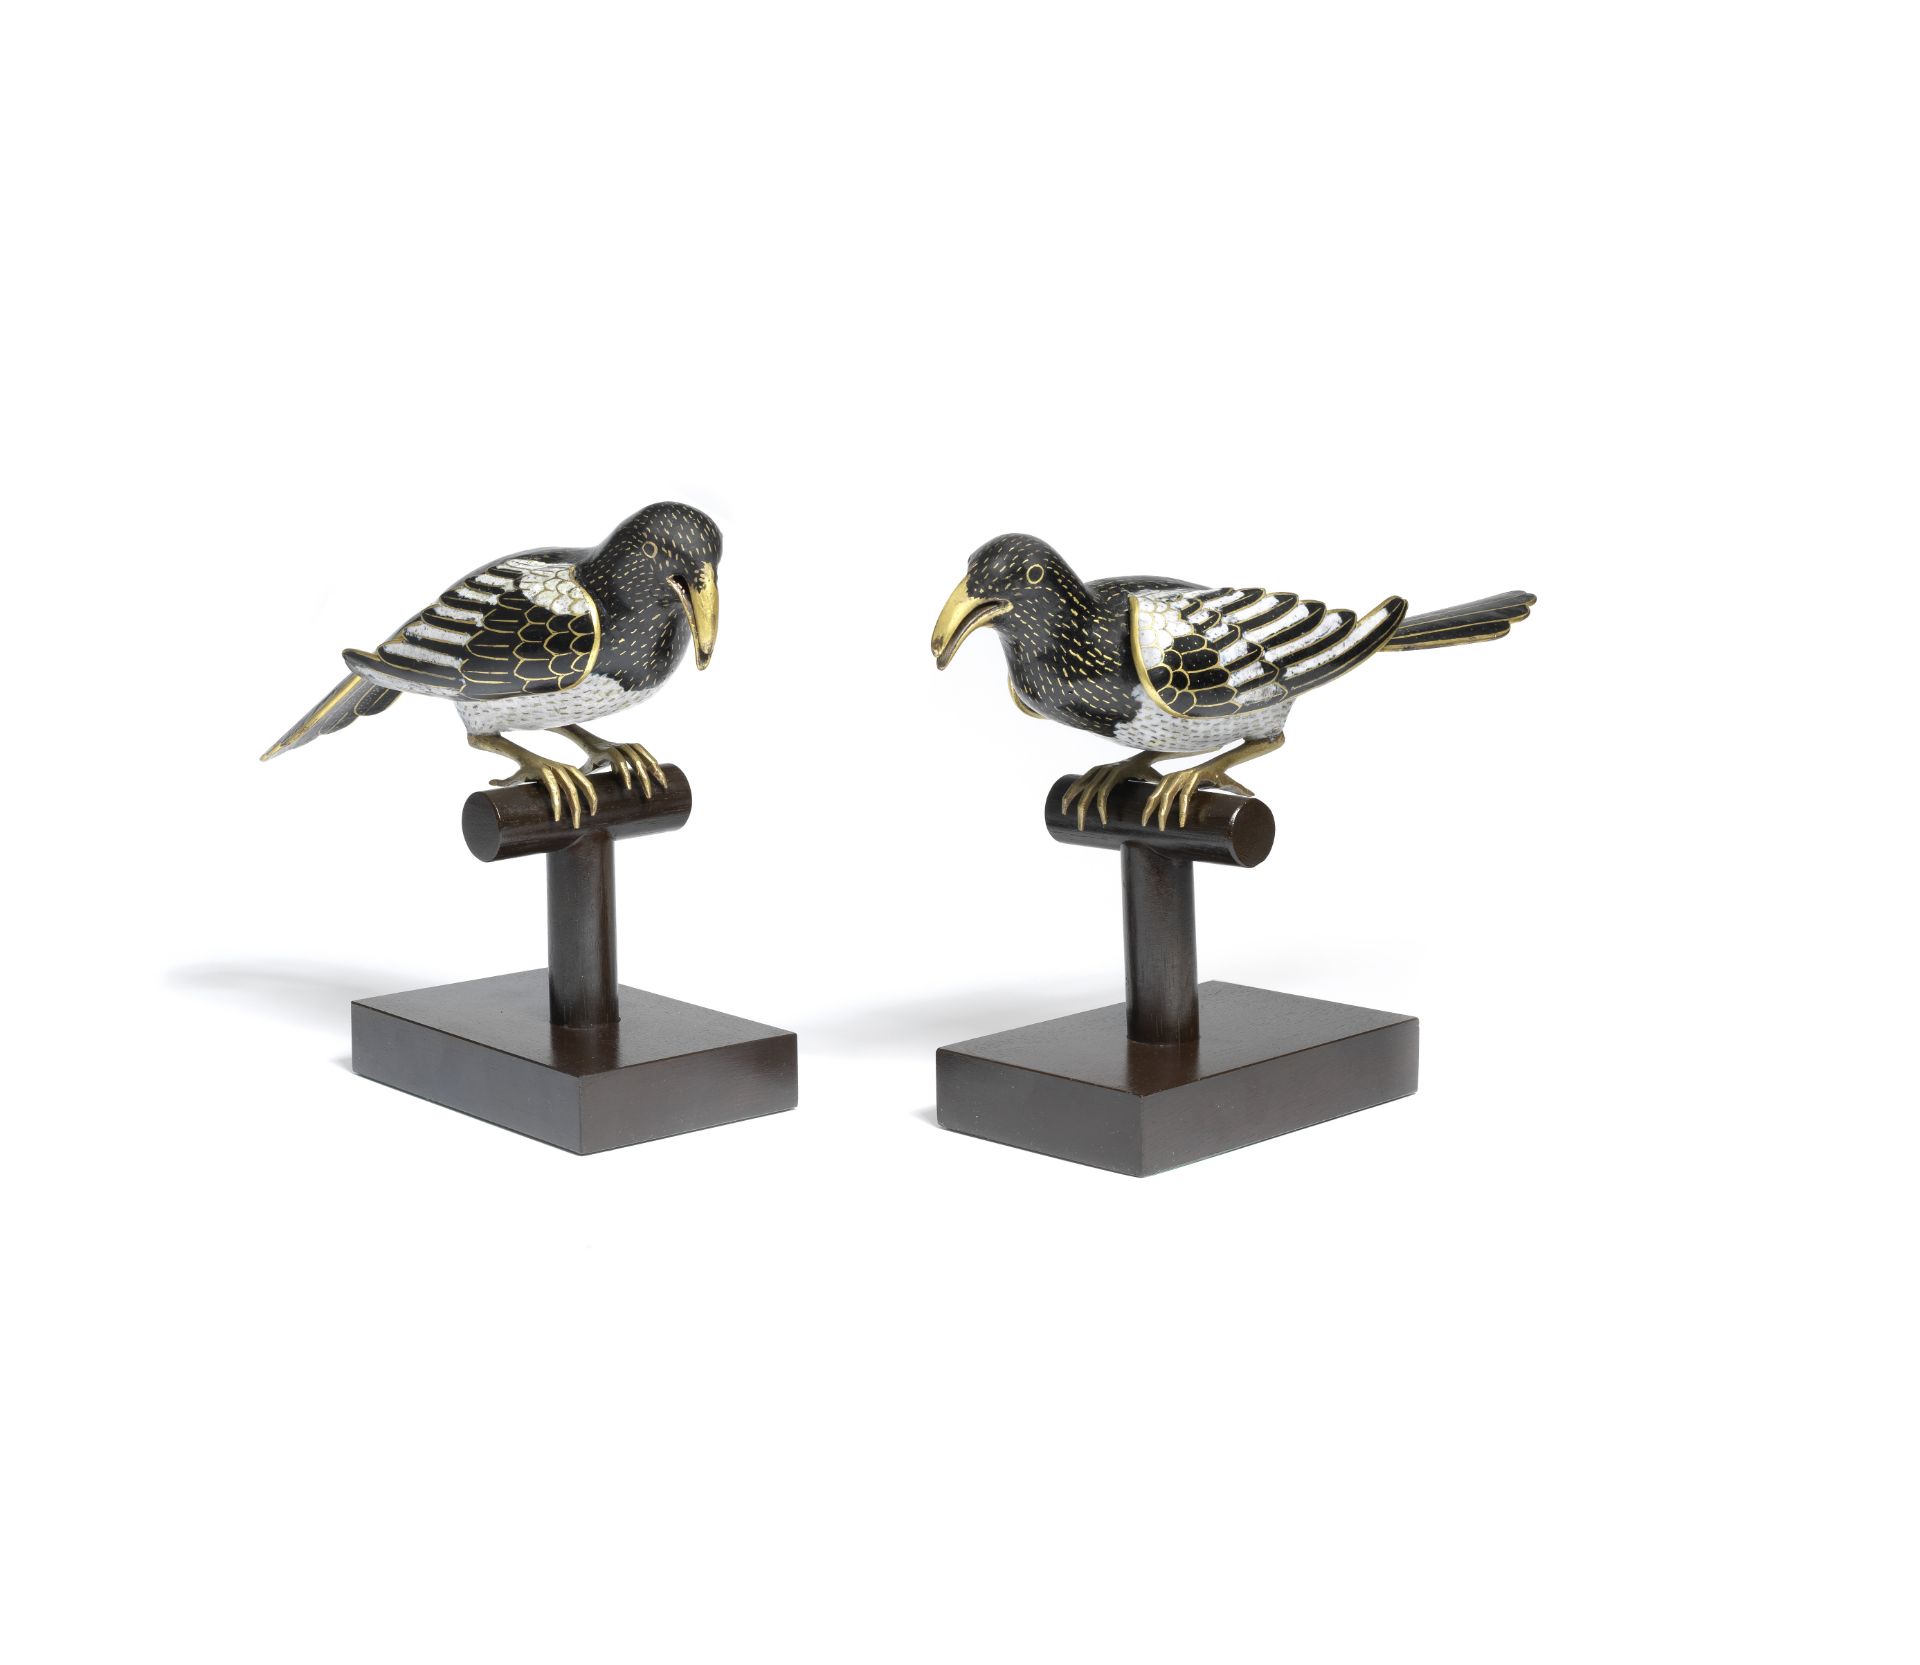 A RARE PAIR OF CLOISONN&#201; ENAMEL MAGPIES ON STANDS 17th/18th century (2)